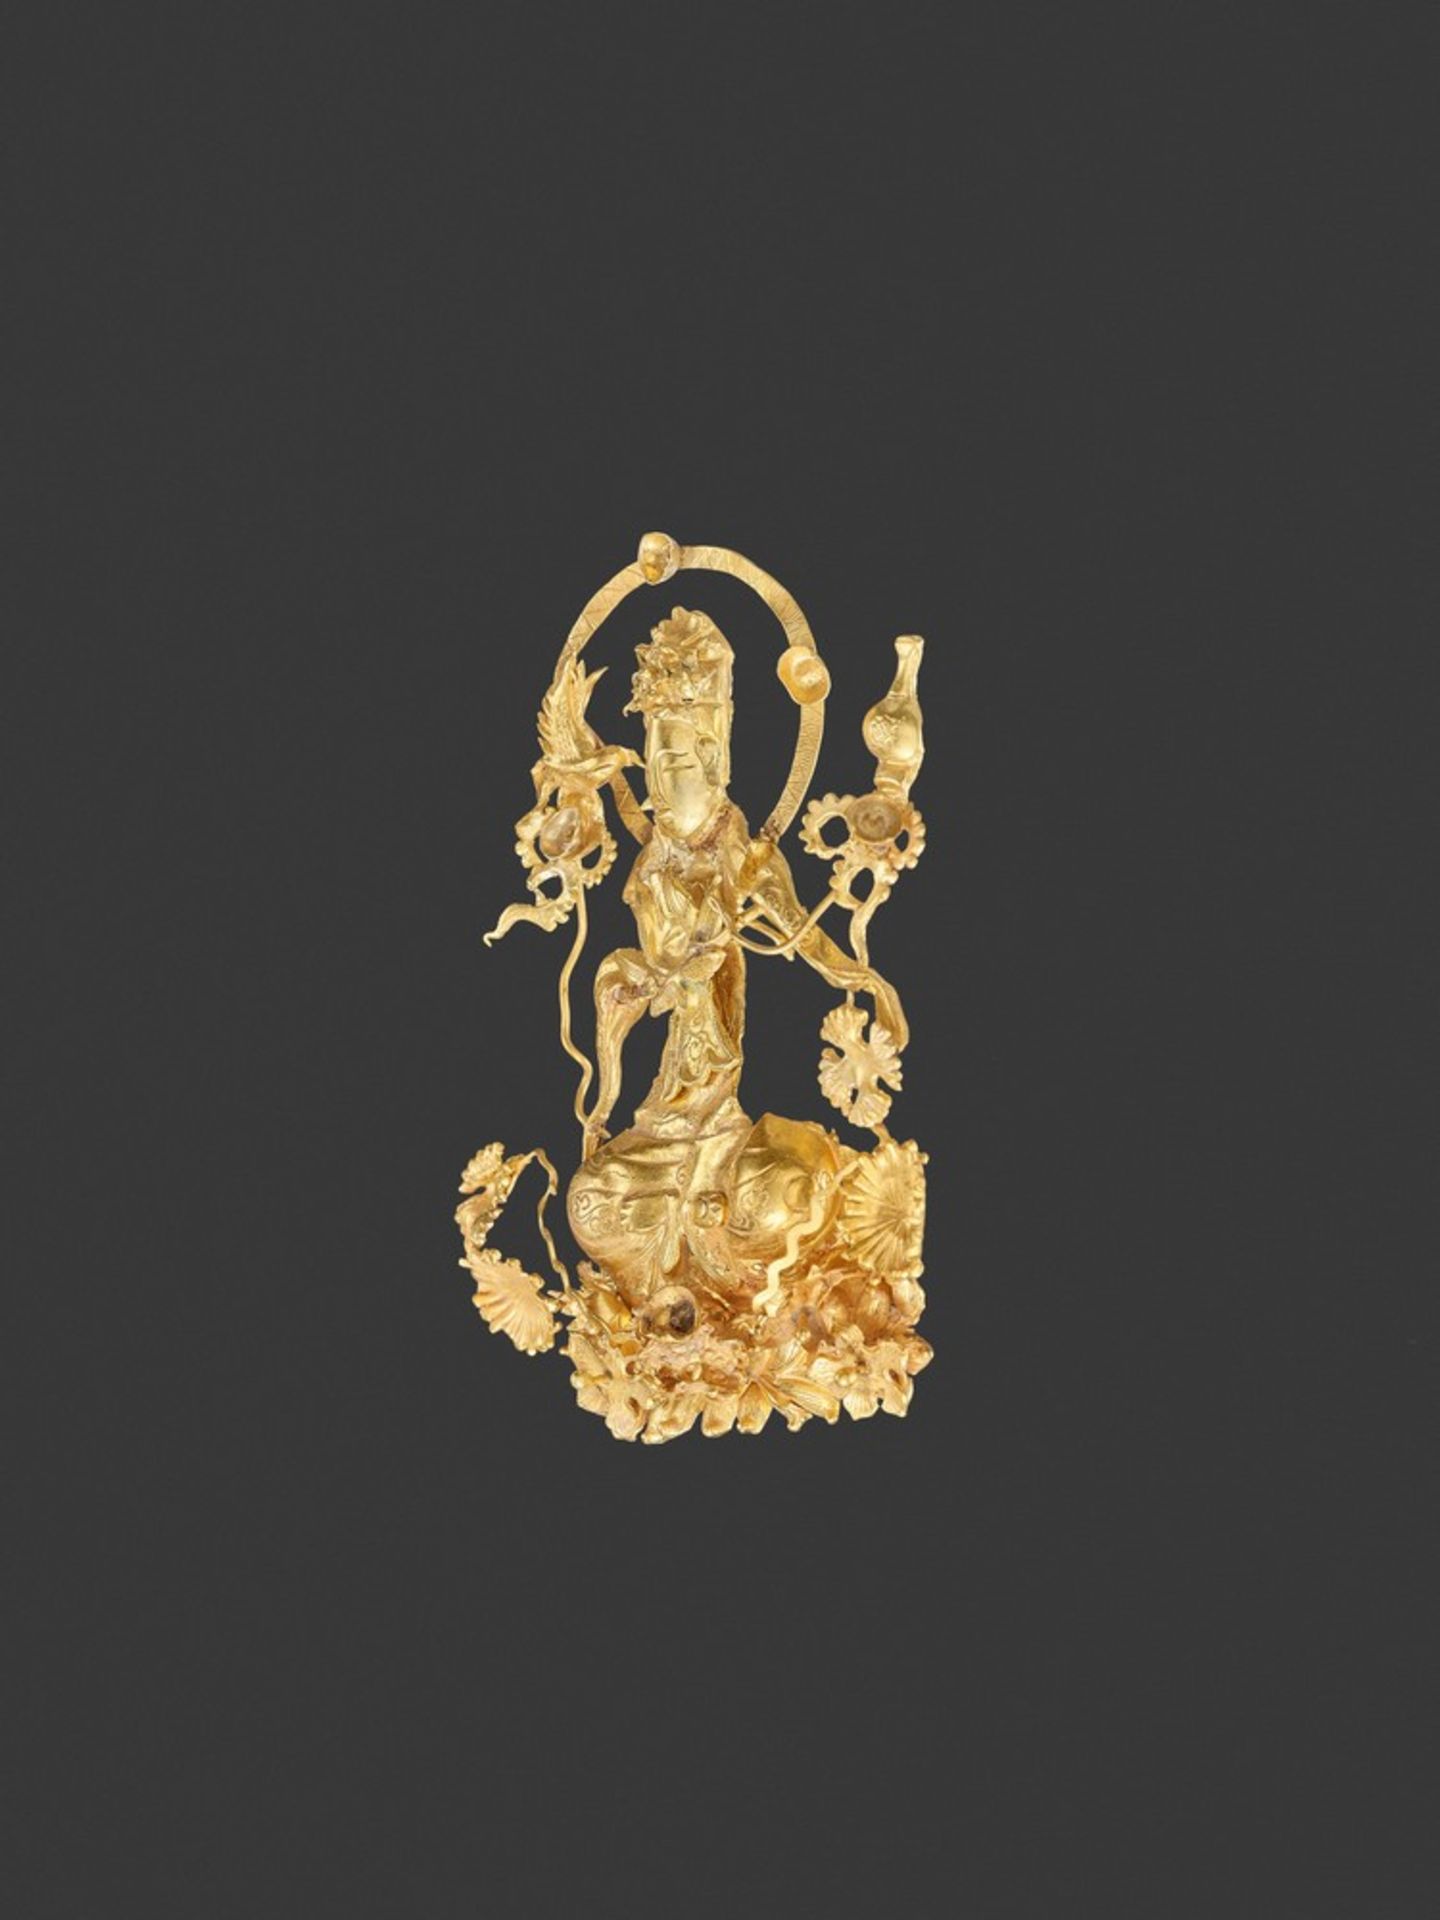 A LIAO DYNASTY GOLD REPOUSSÉ 'GUANYIN' FILIGREE ORNAMENT China, 916-1125. The Goddess of Mercy - Image 2 of 9